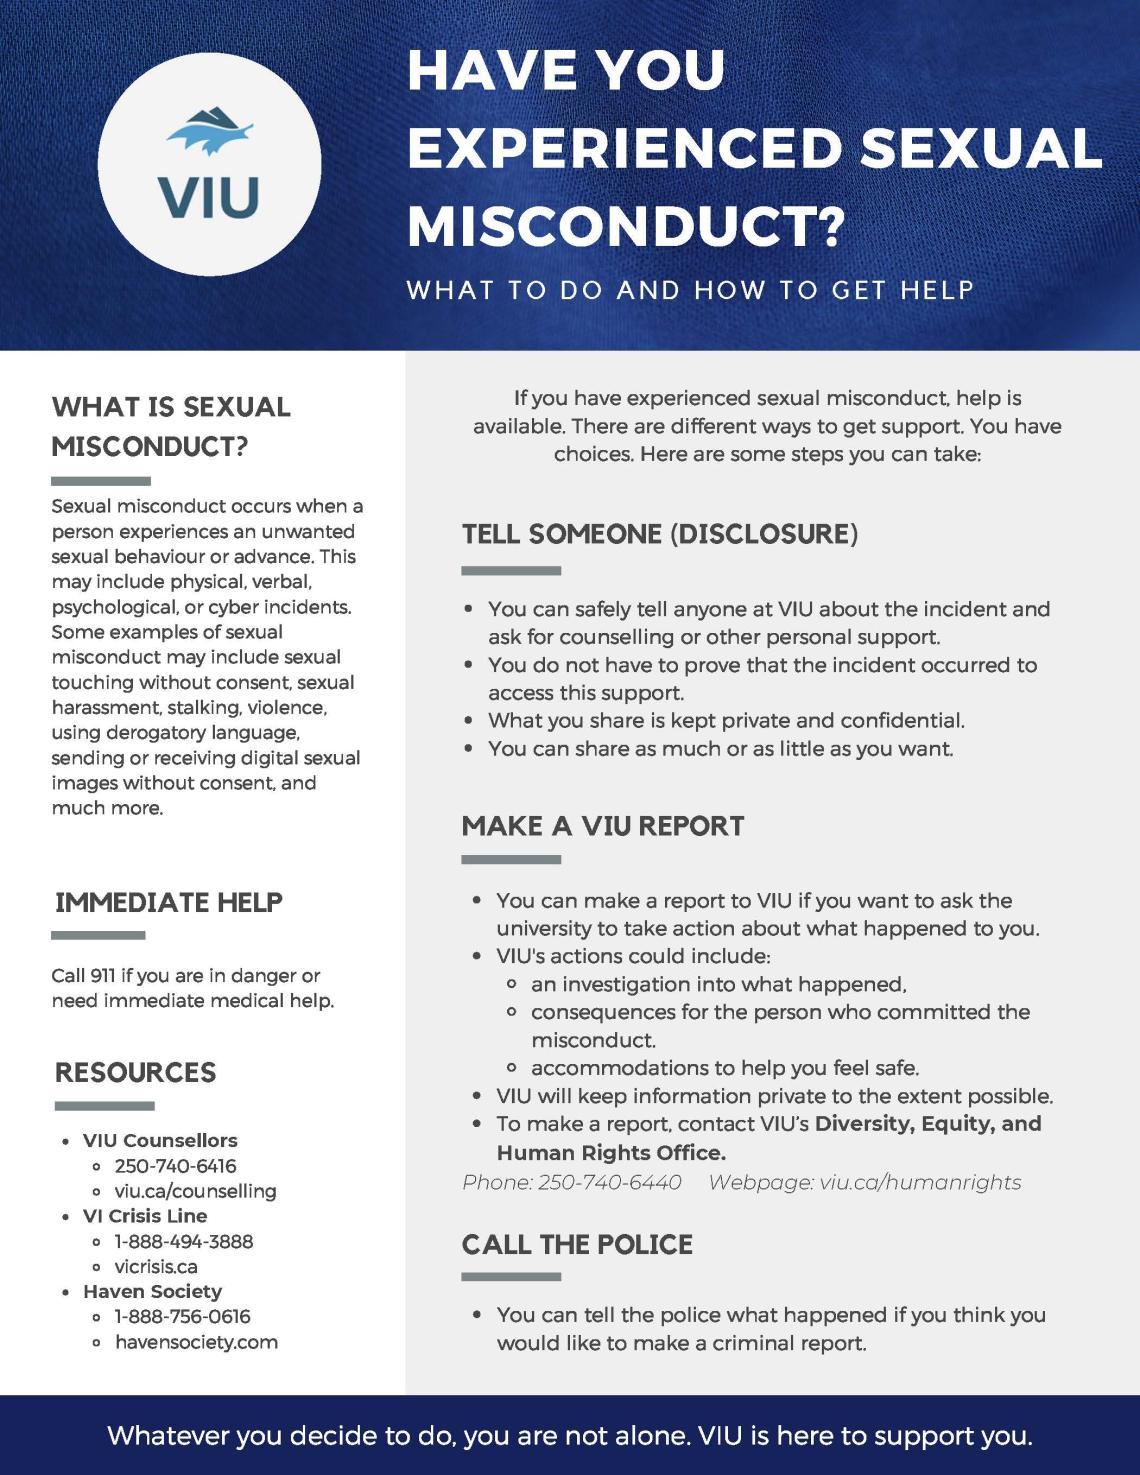 One Page Guide for People Who Have Experienced Sexual Misconduct